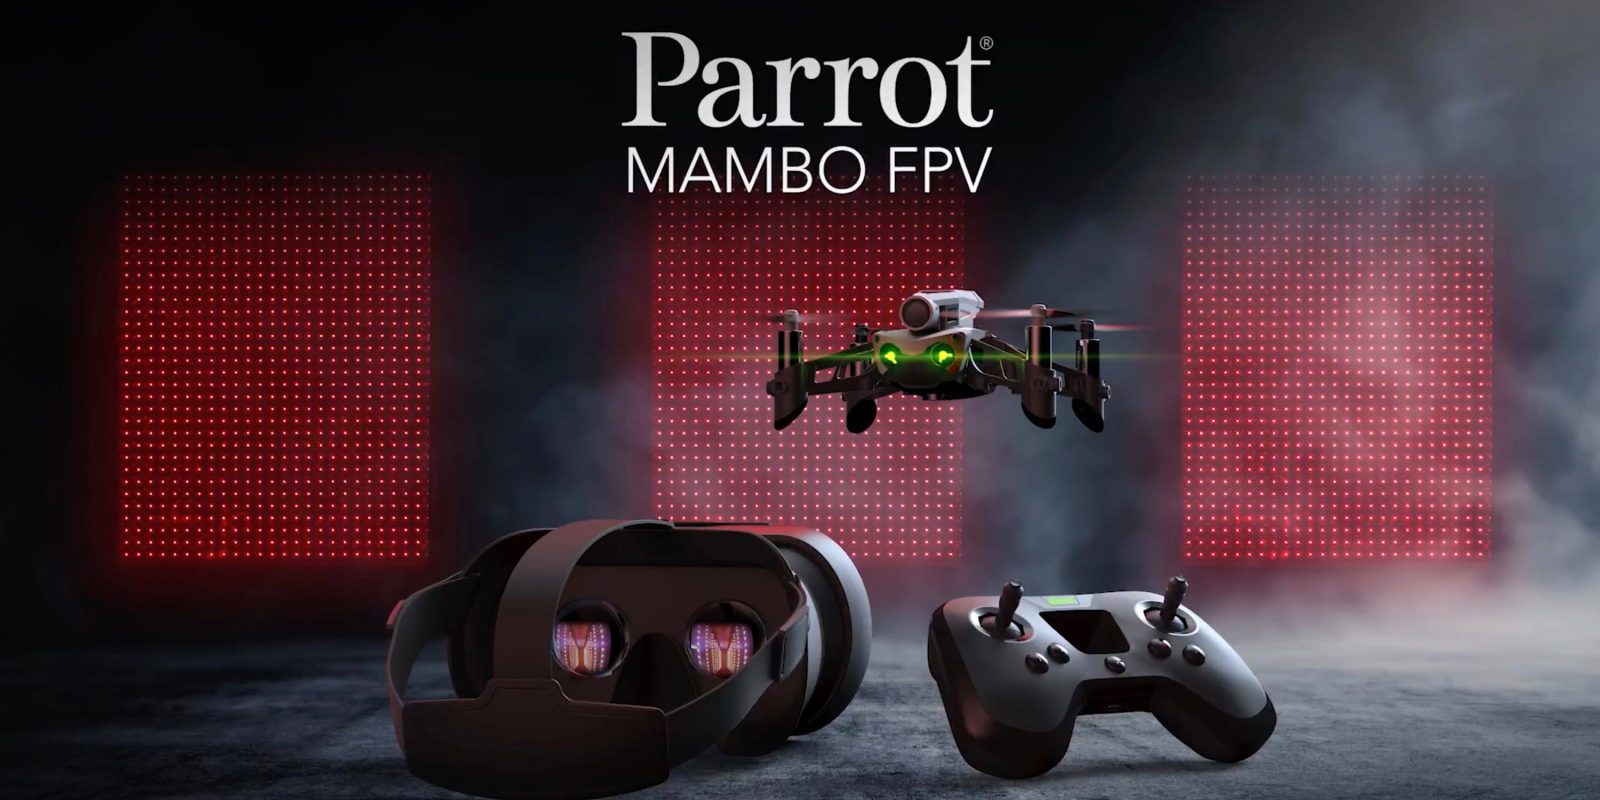 Parrot launches new Parrot Mambo FPV race mini-drone